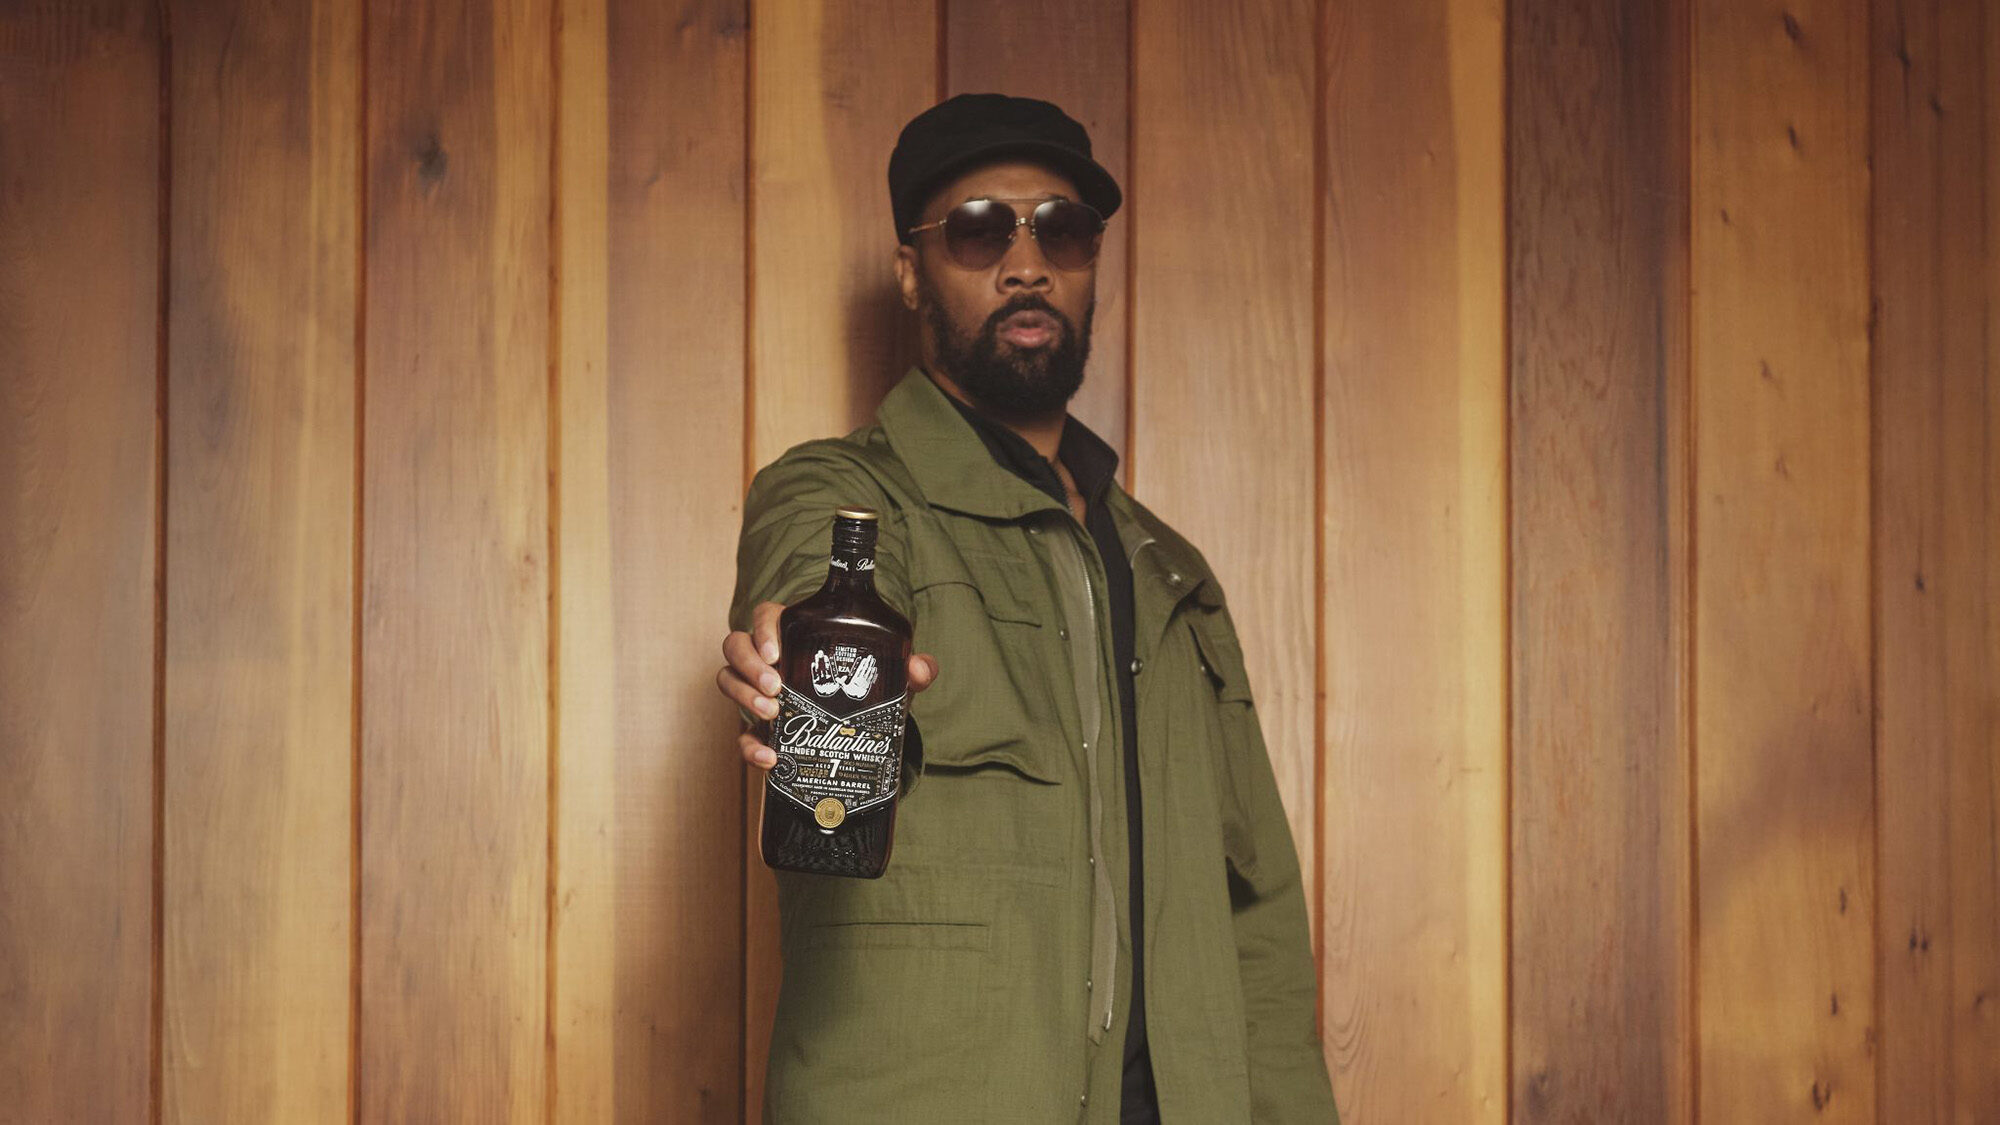 RZA Releases His Own Bottle Of Ballantine’s Whisky